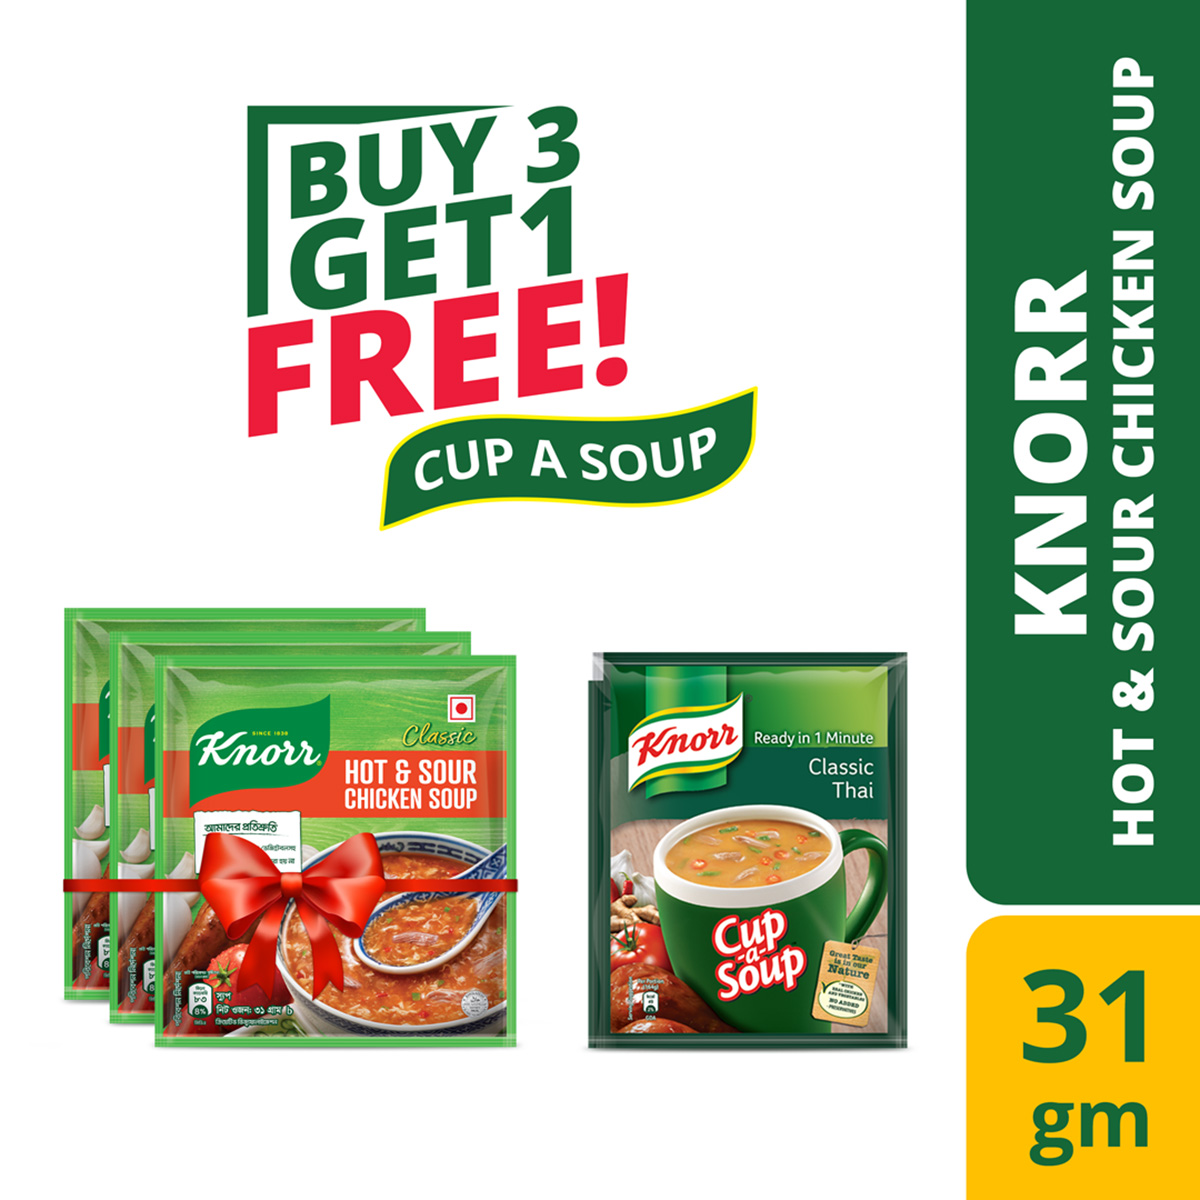 Knorr Soup Hot and Sour Chicken 31g( Buy 3 Get 1 Cup a Soup)